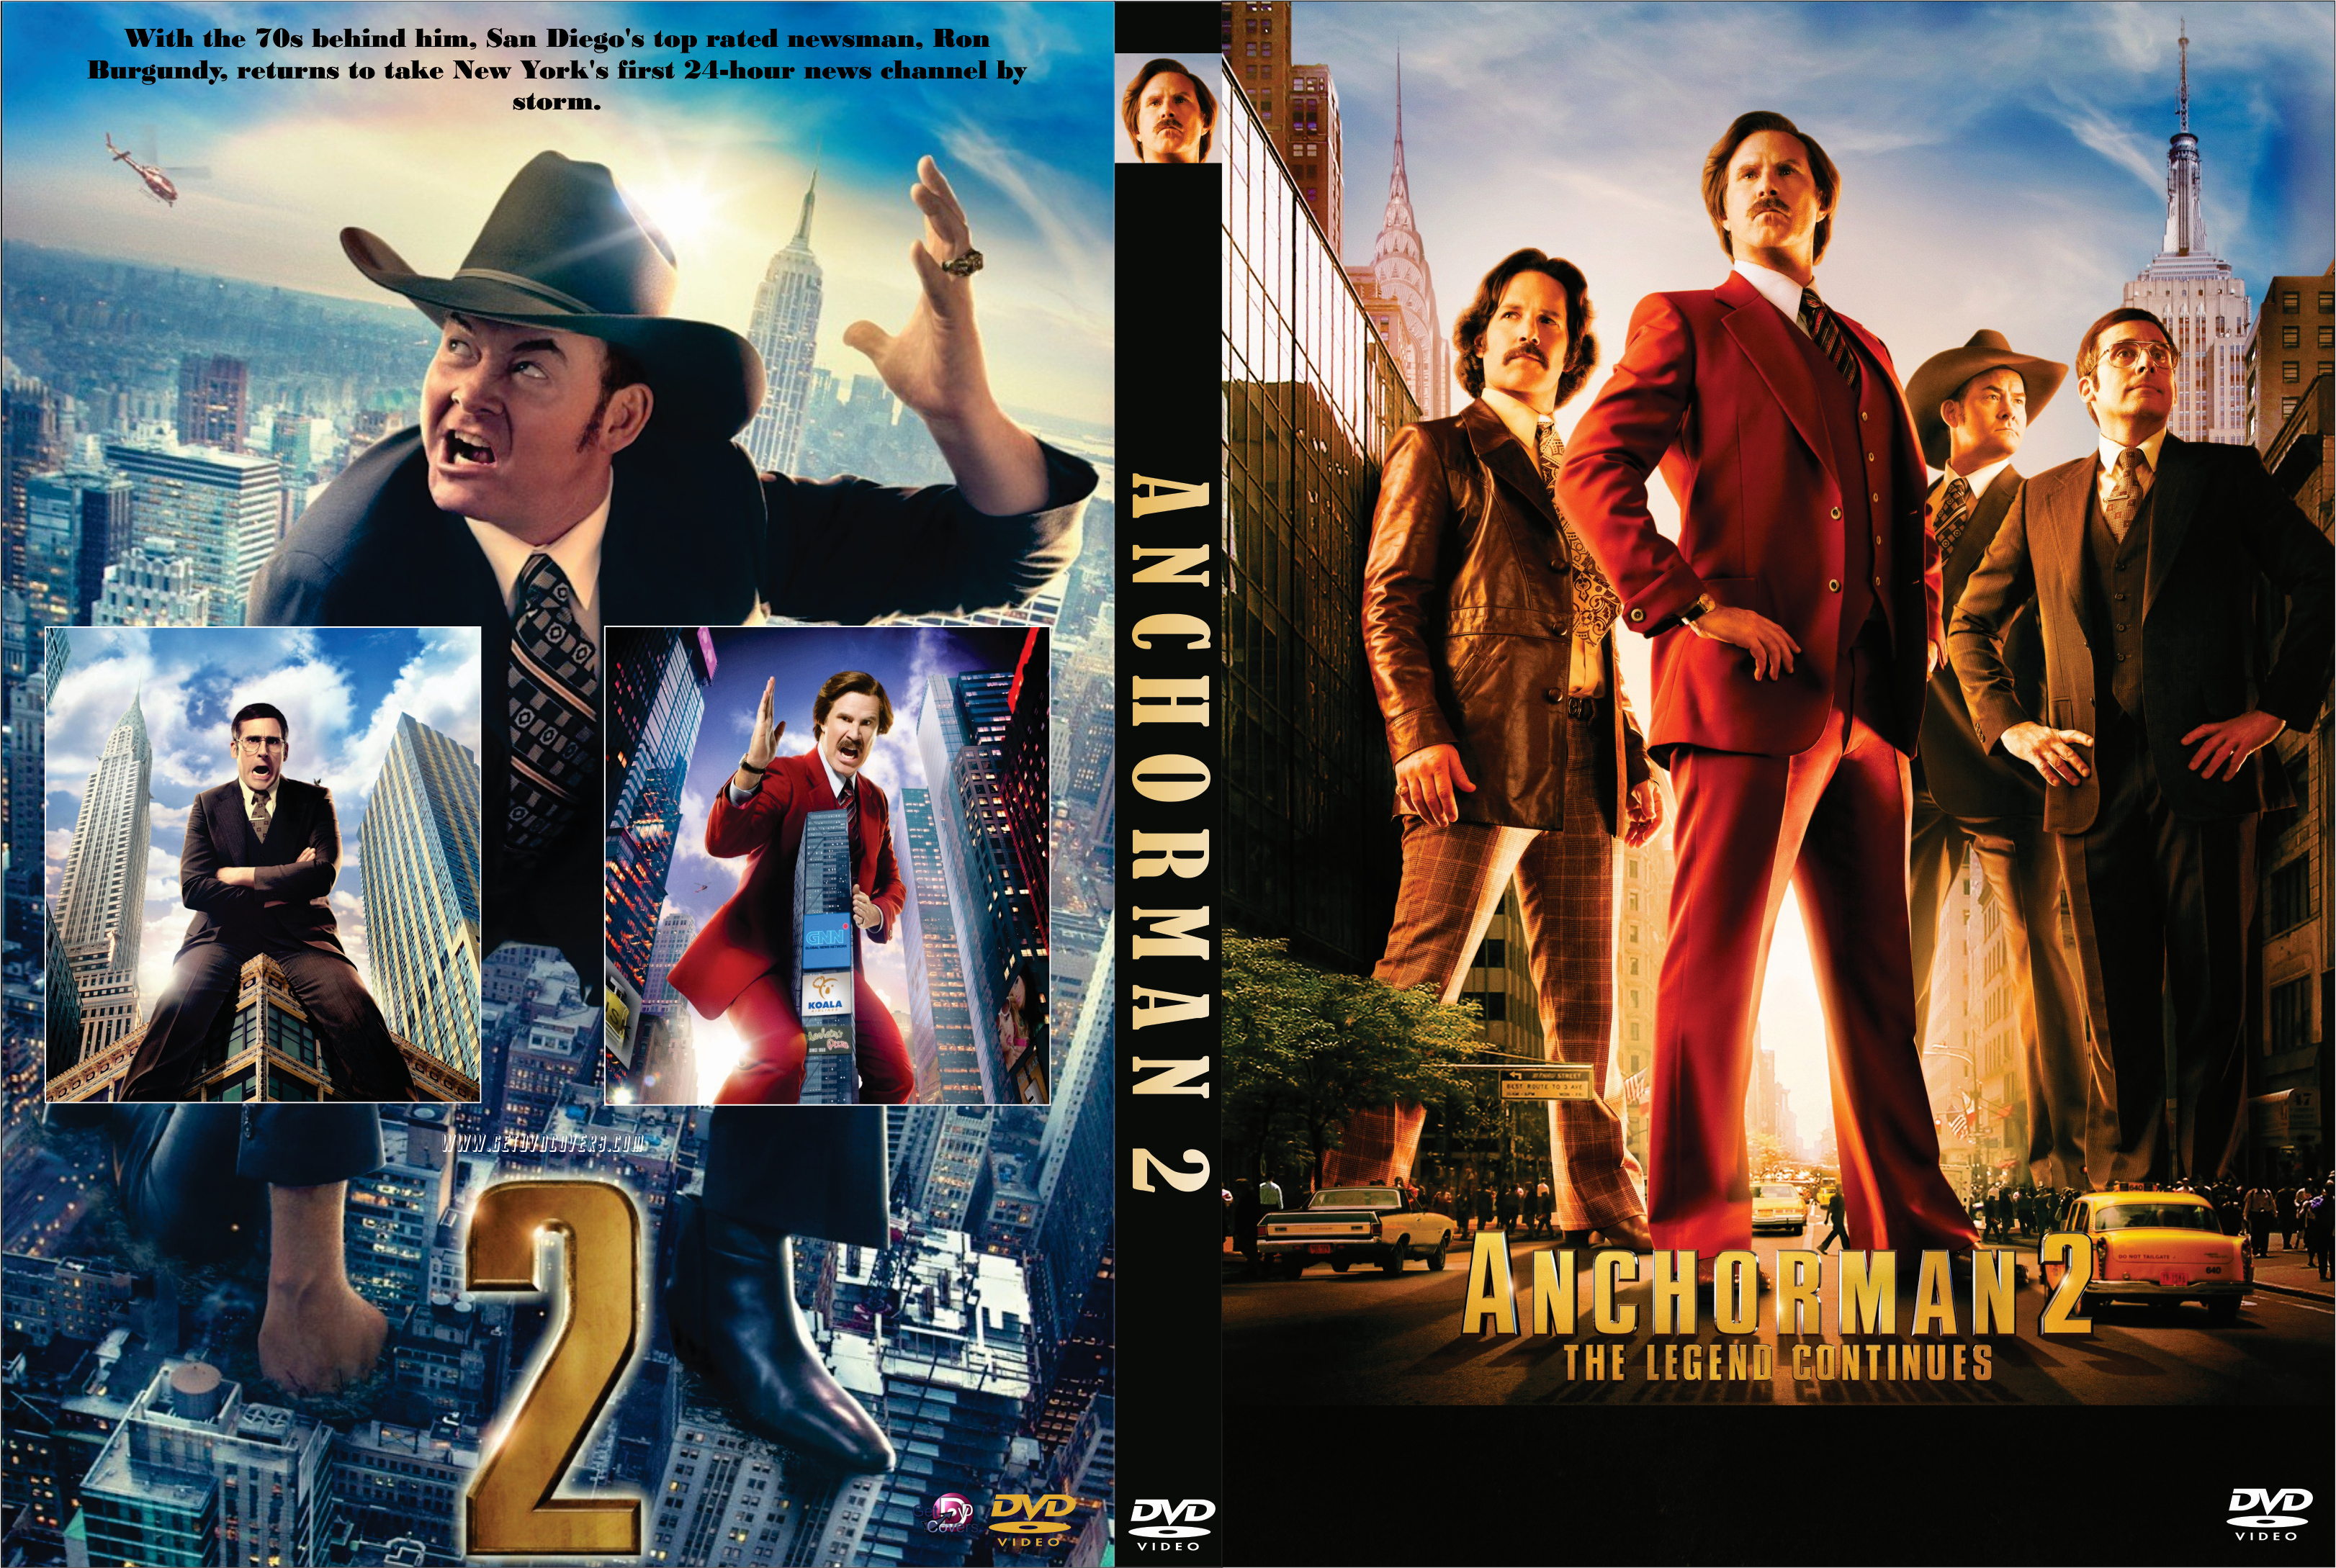 Anchorman 2: The Legend Continues #8